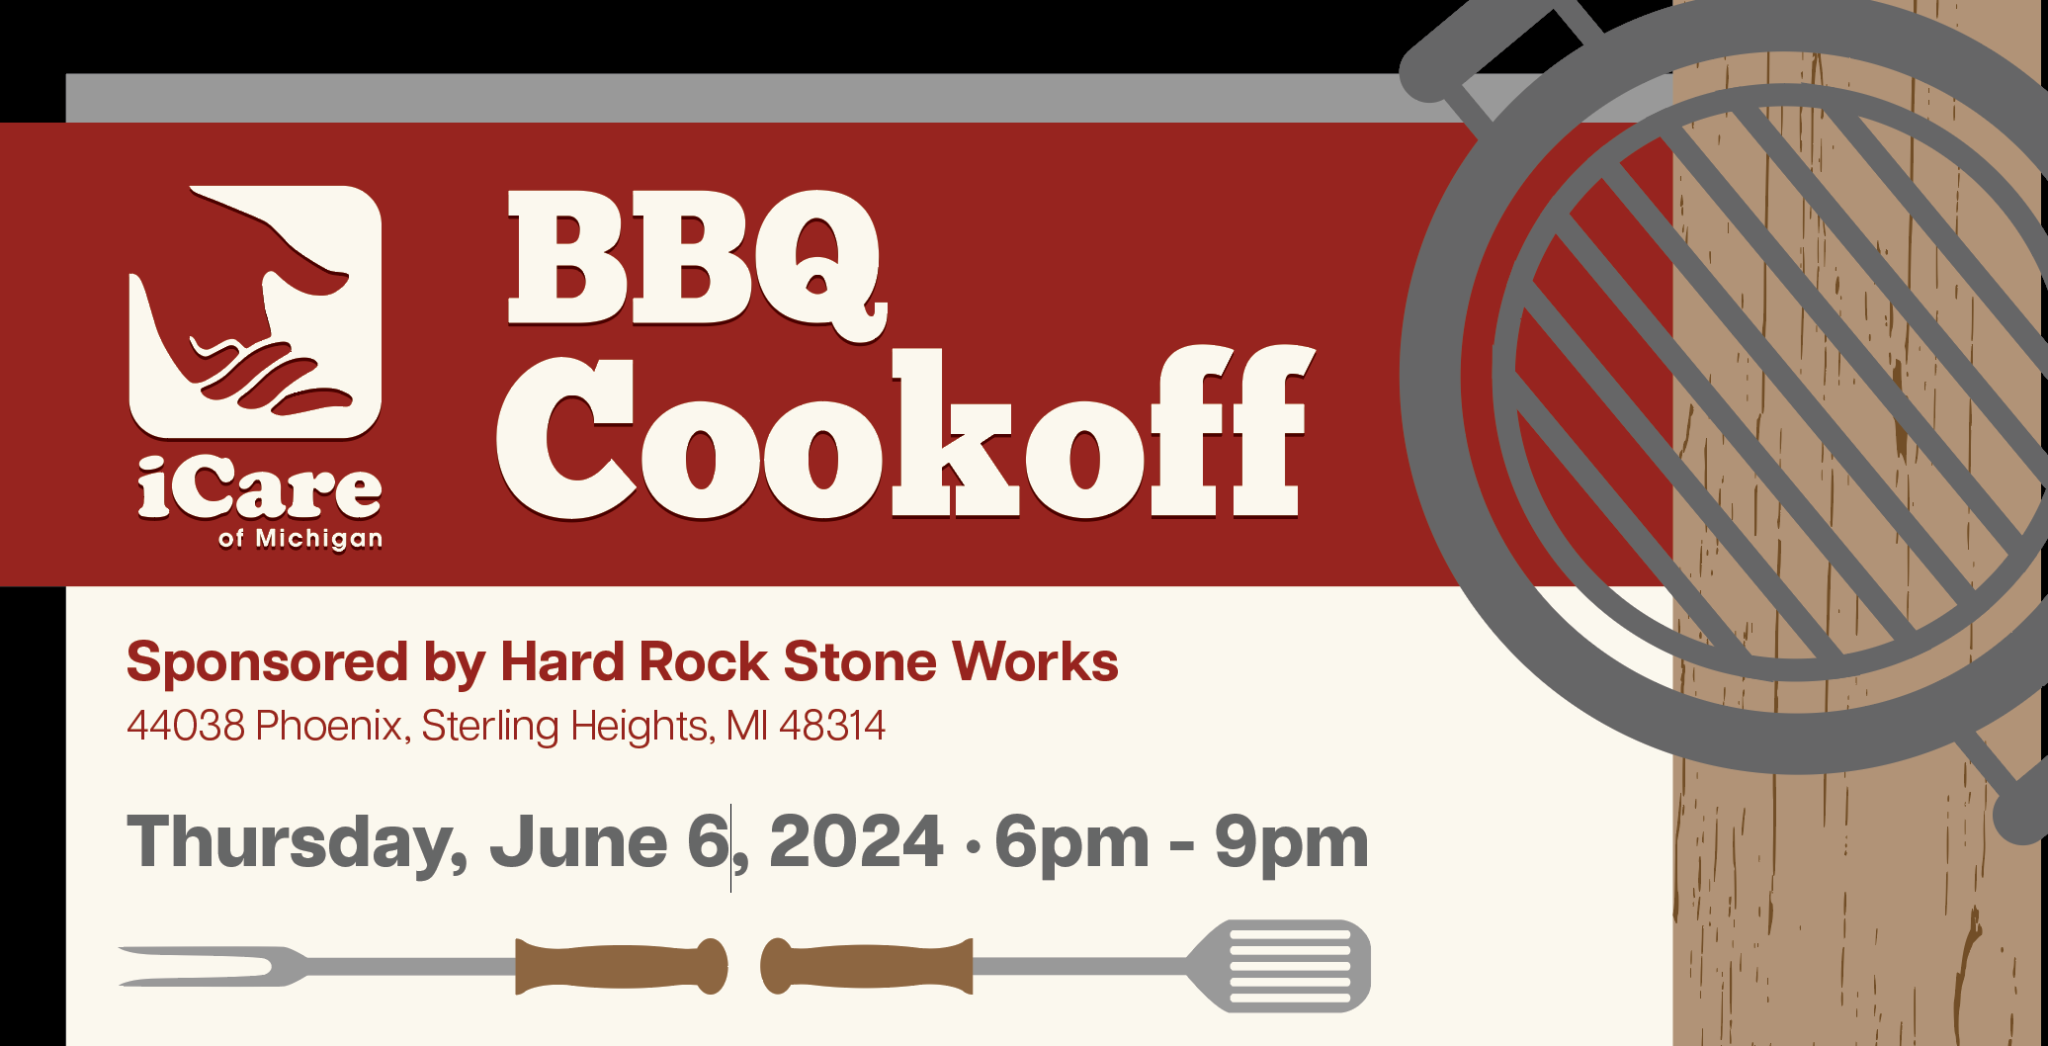 bbq cookoff